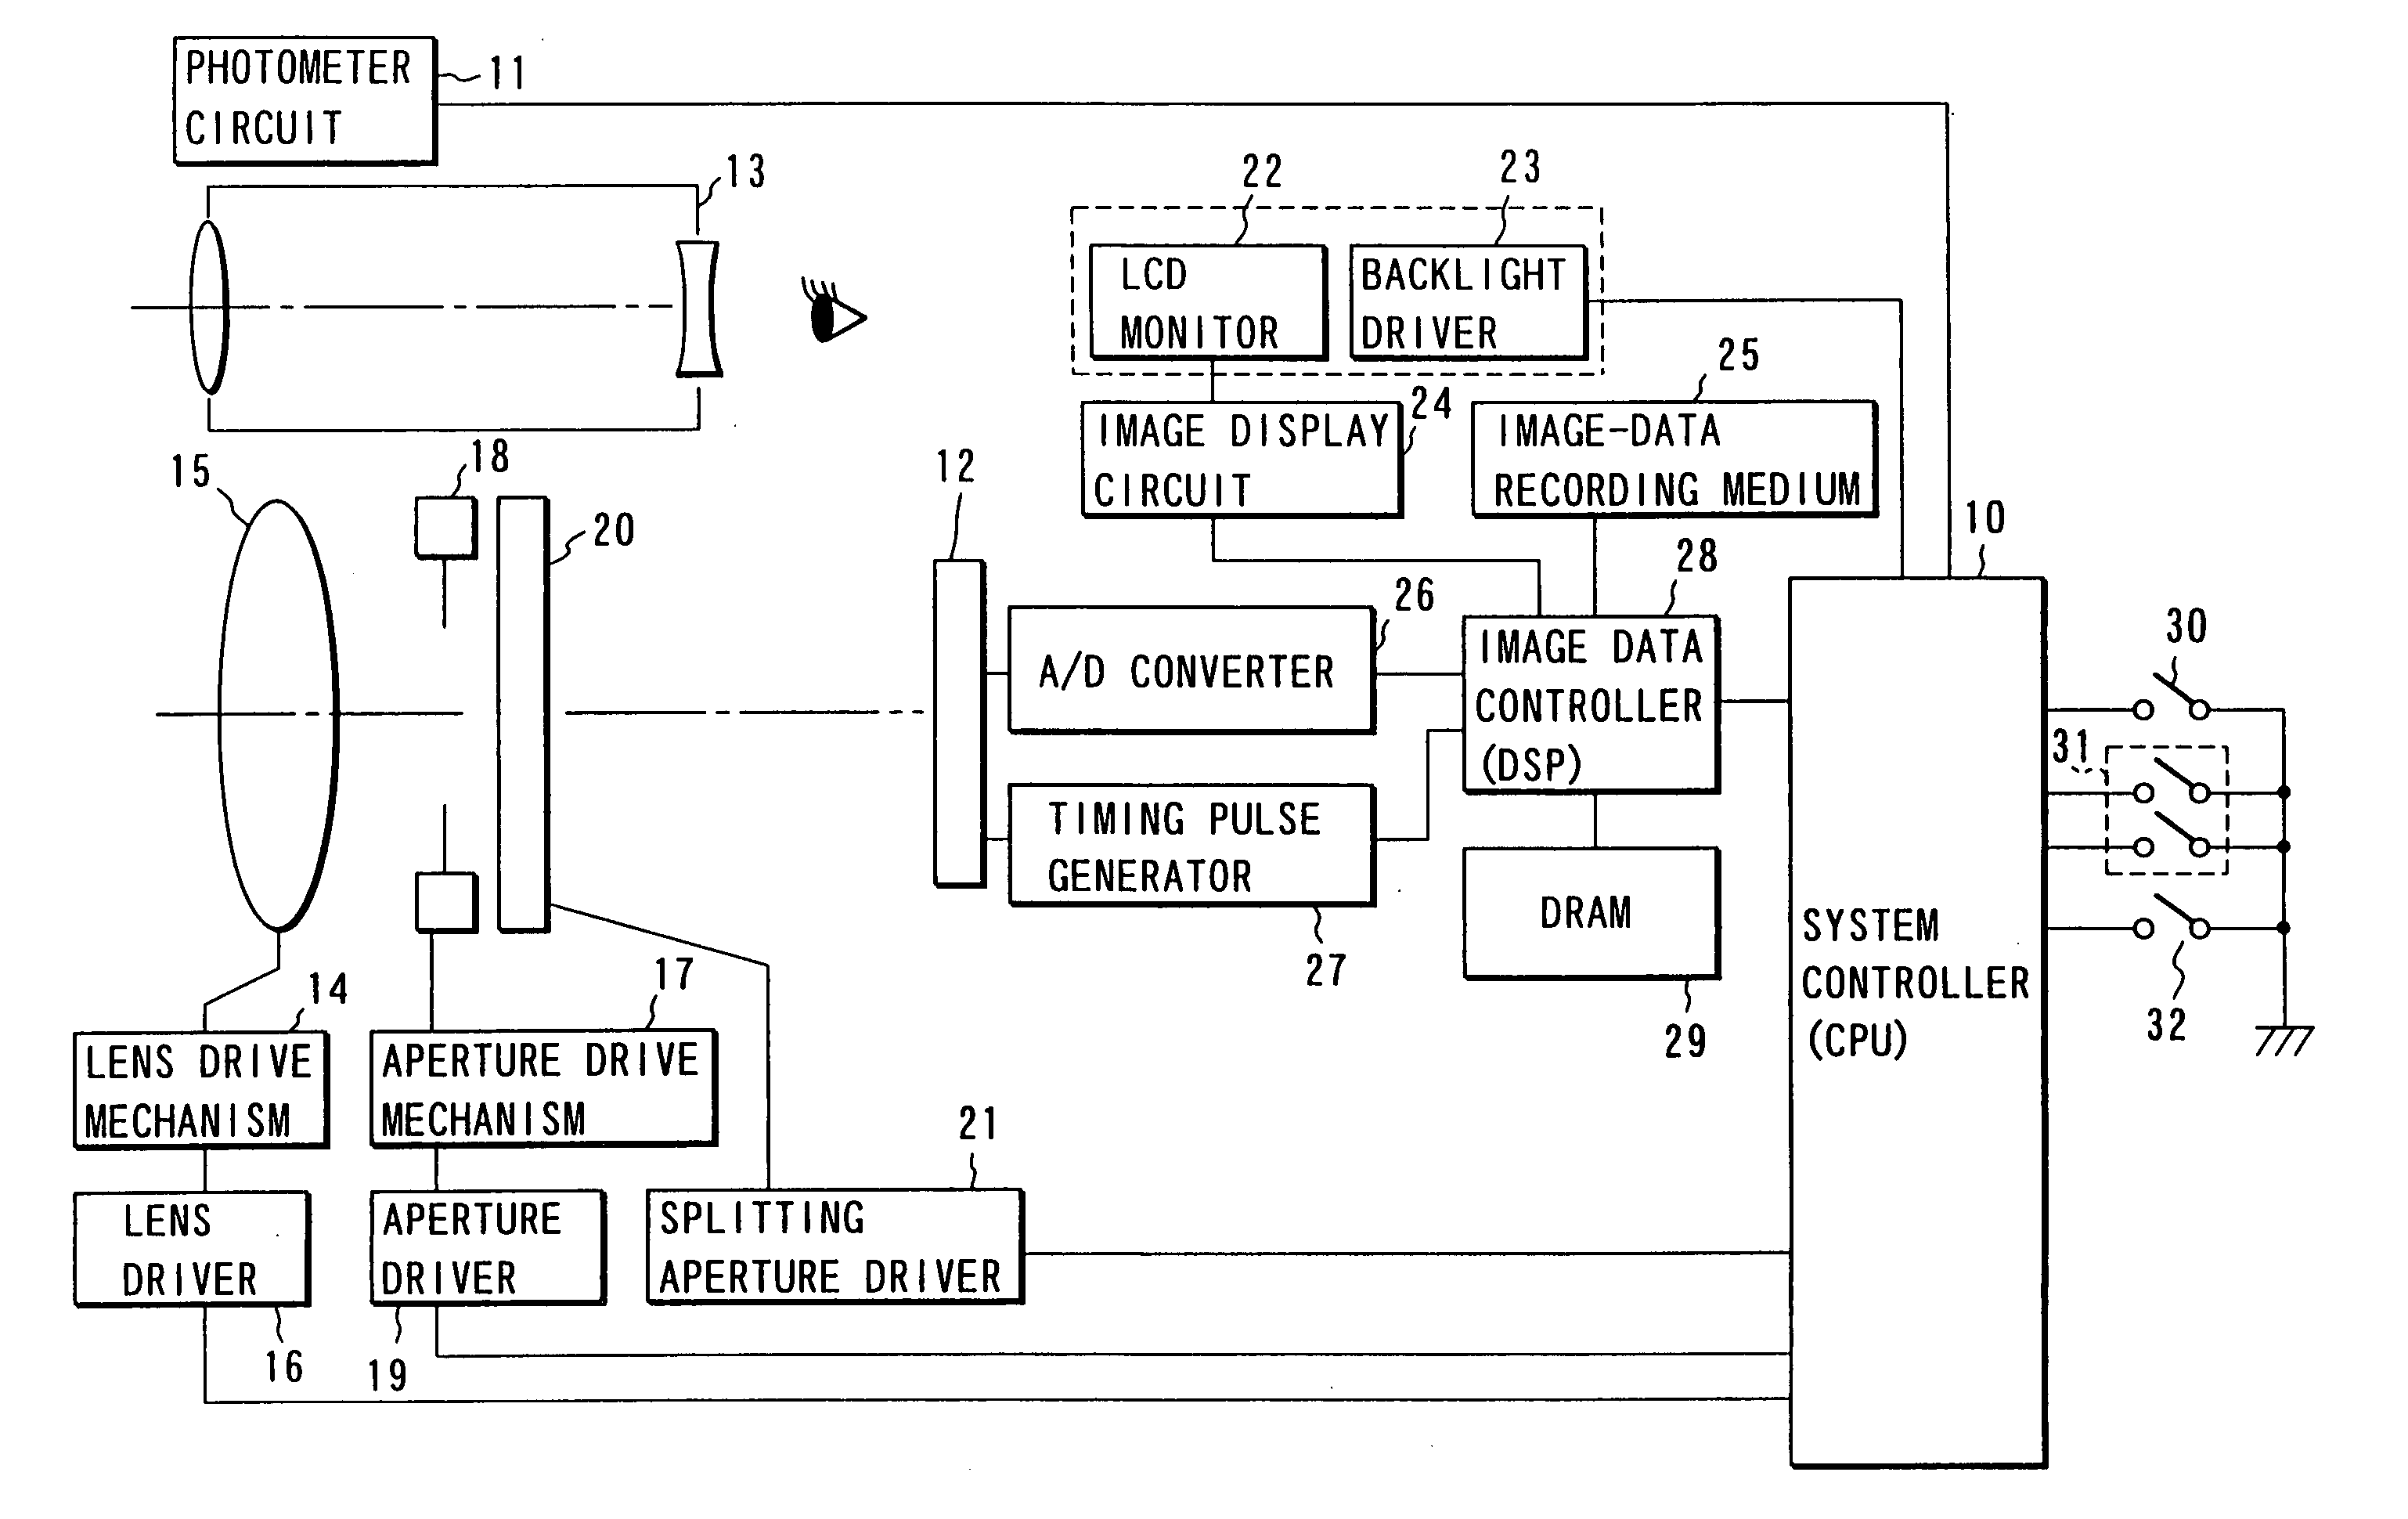 Electronic still camera with capability to perform optimal focus detection according to selected mode